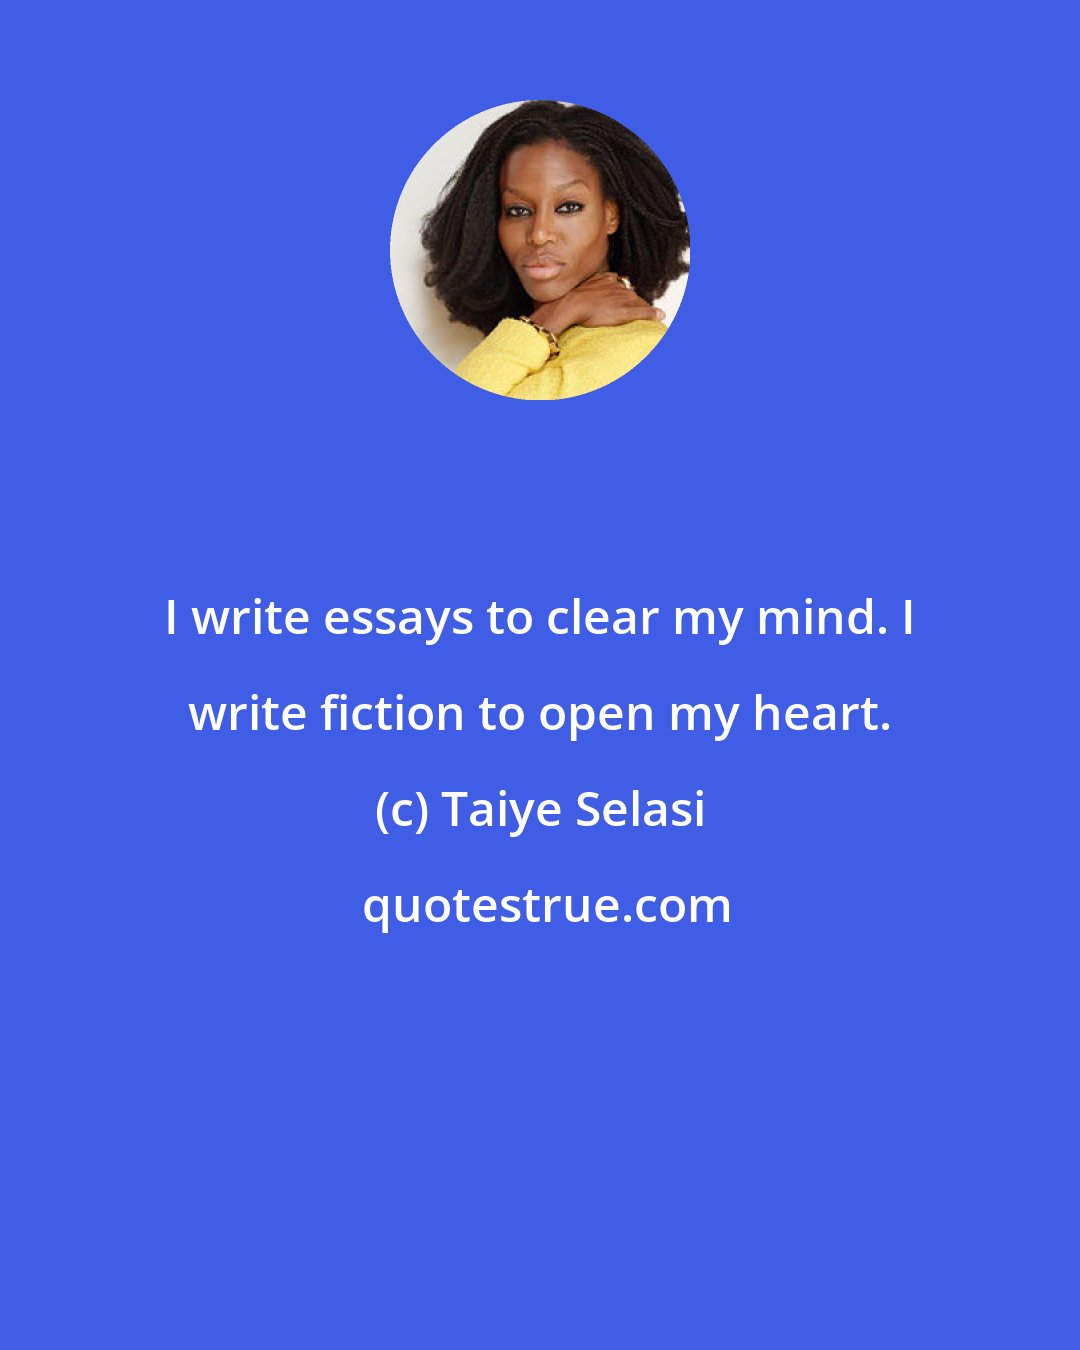 Taiye Selasi: I write essays to clear my mind. I write fiction to open my heart.